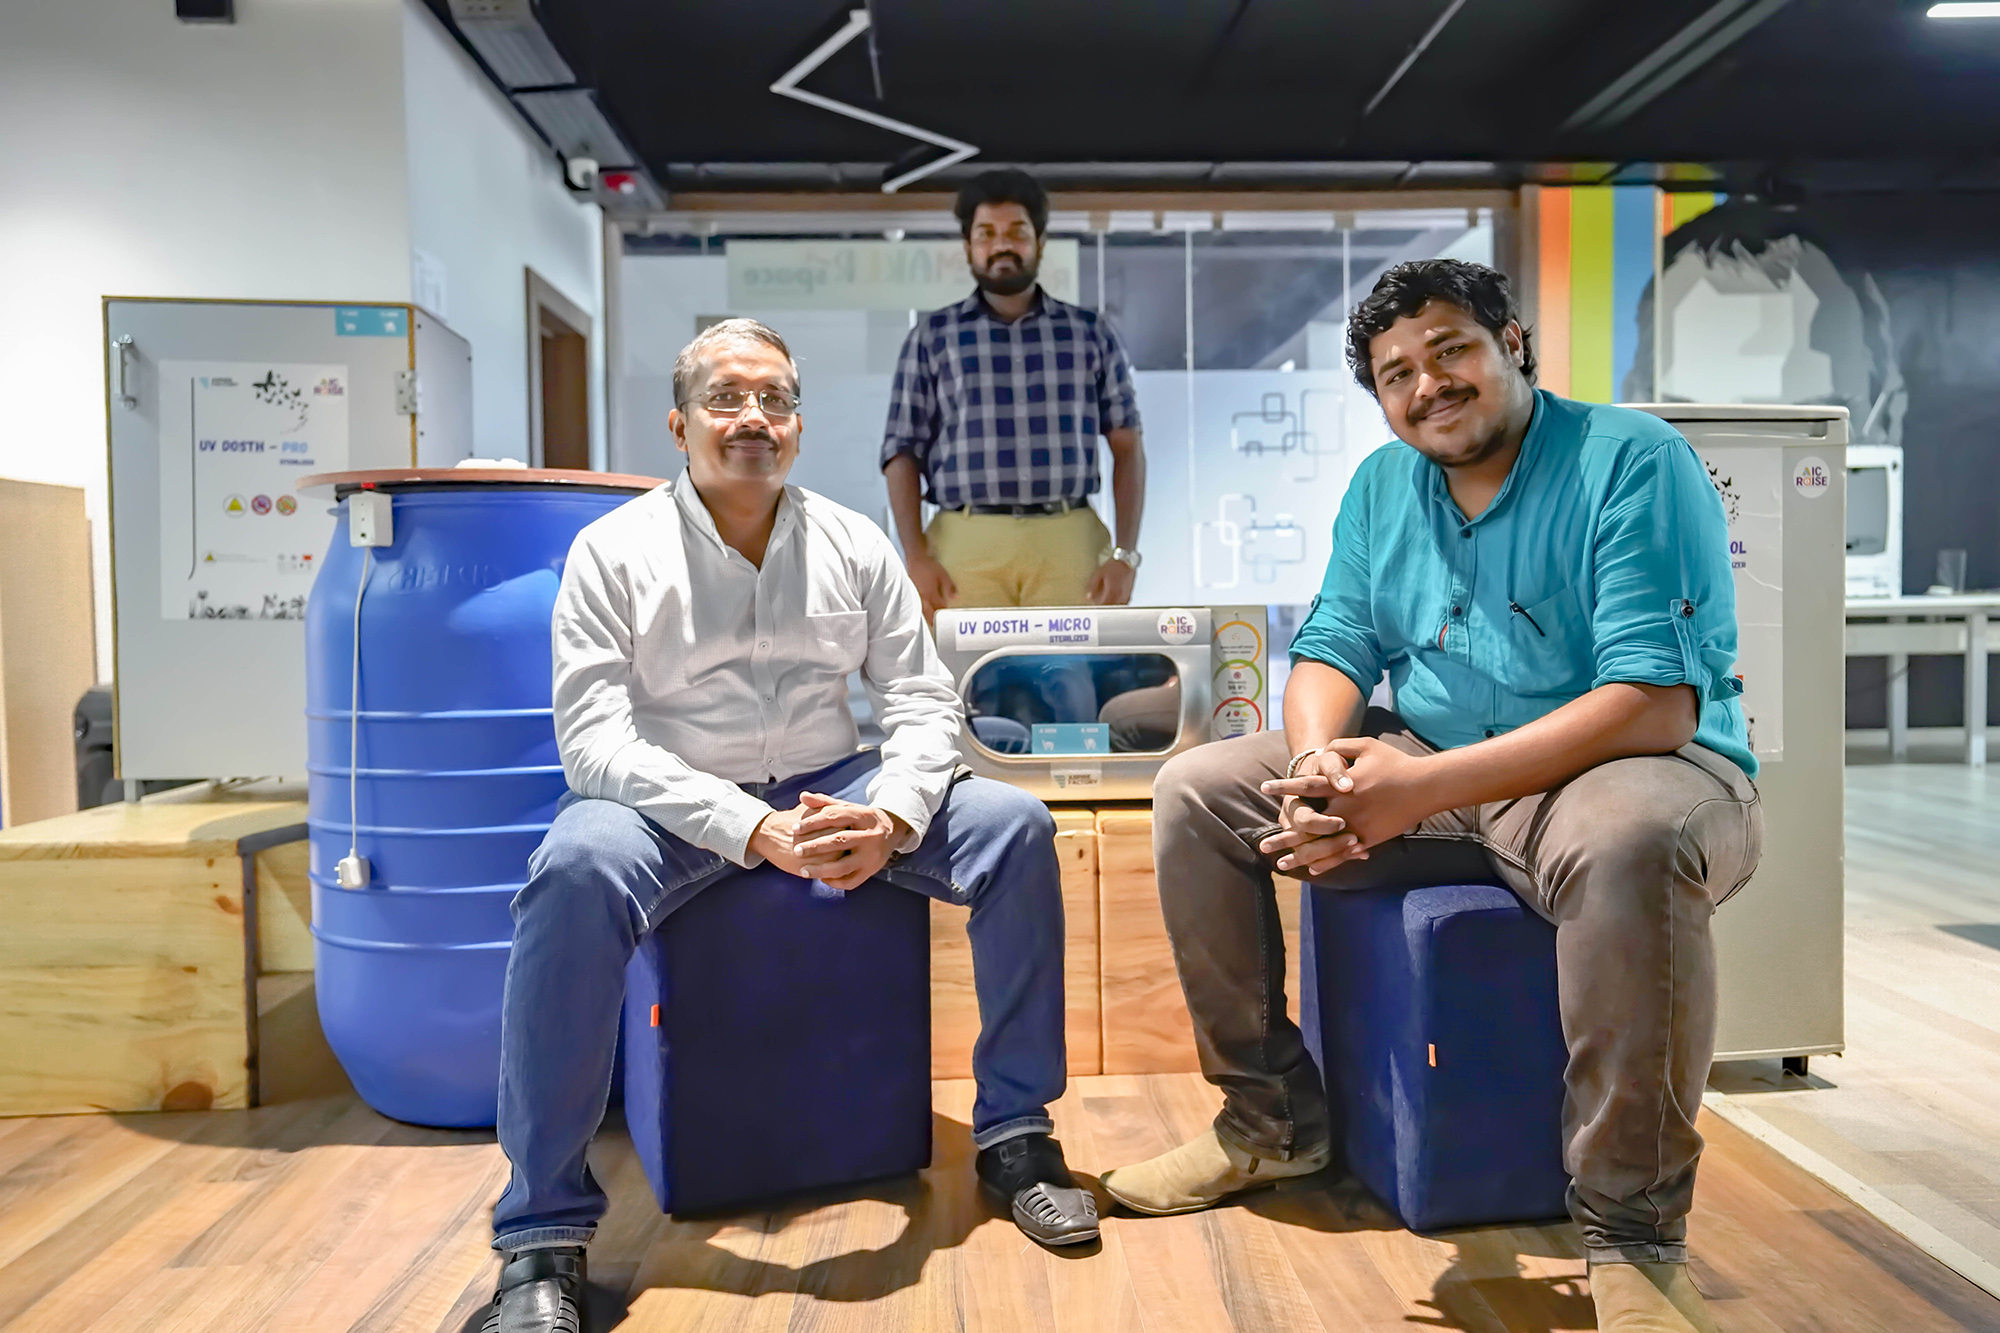 Aspire factory AIC Raise Backed Startup world’s most cost-effective sanitisation chamber from Coimbatore